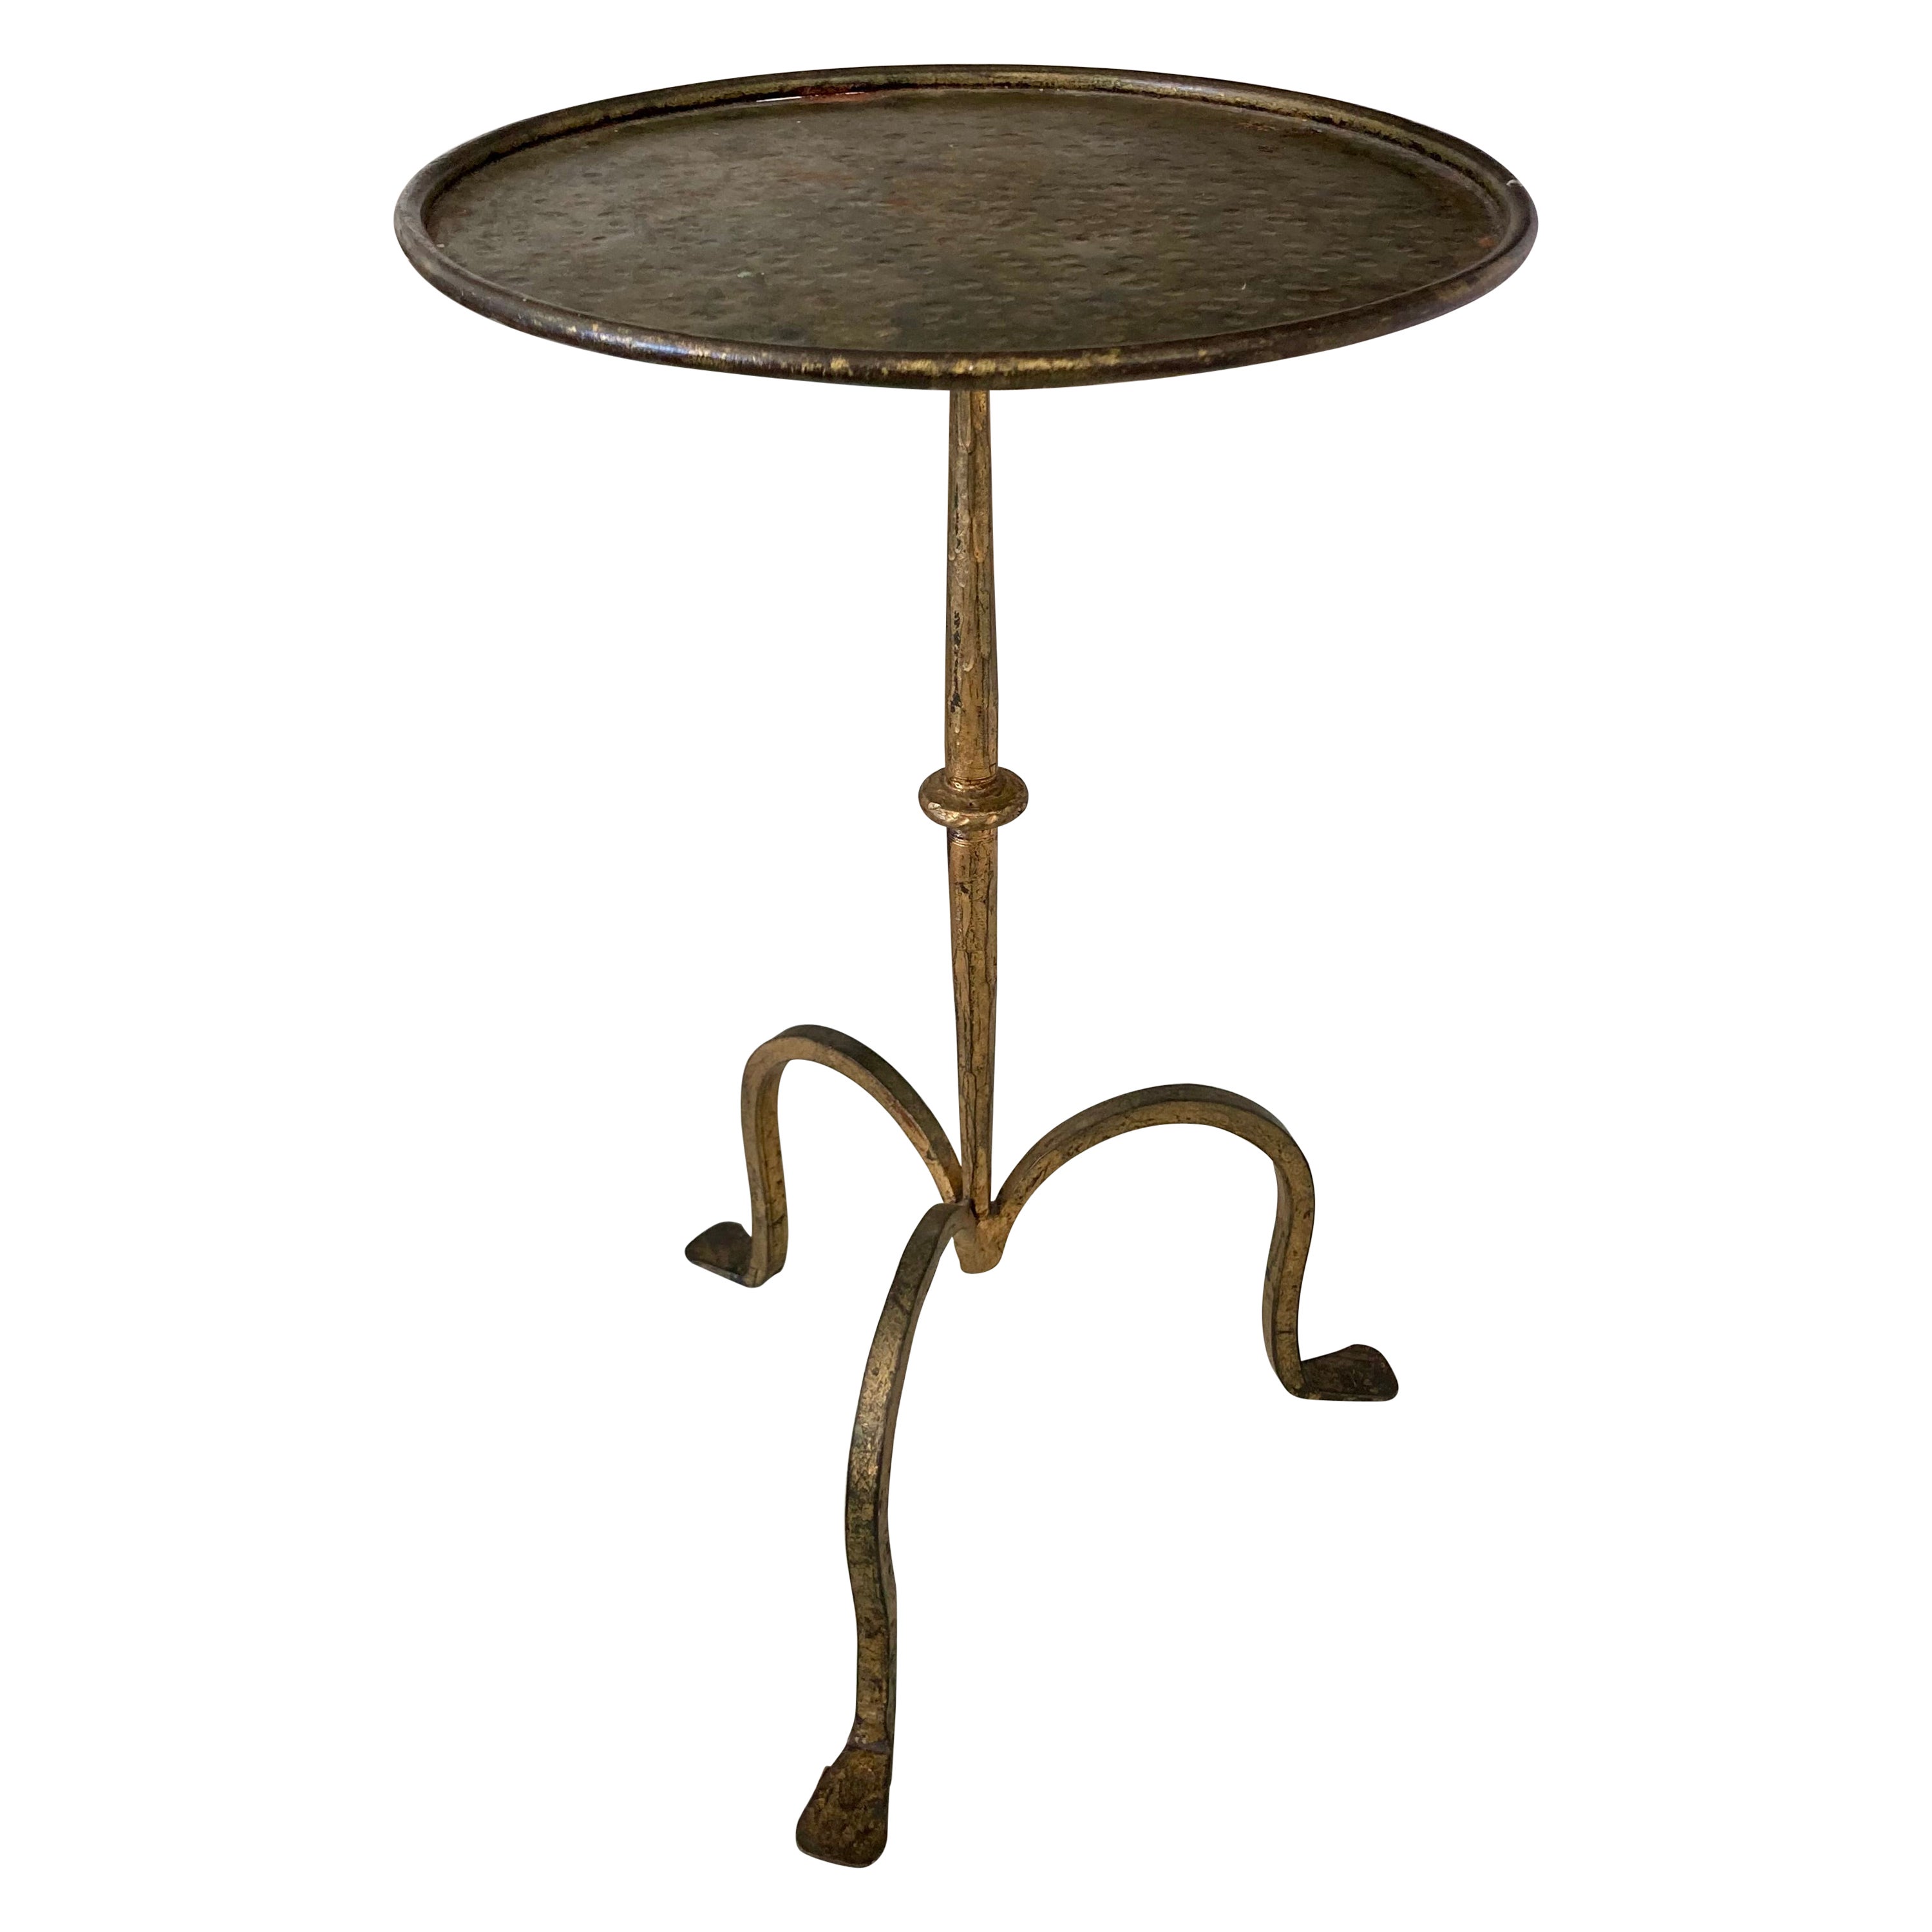 French Gilt Bronze Style Gueridon Table